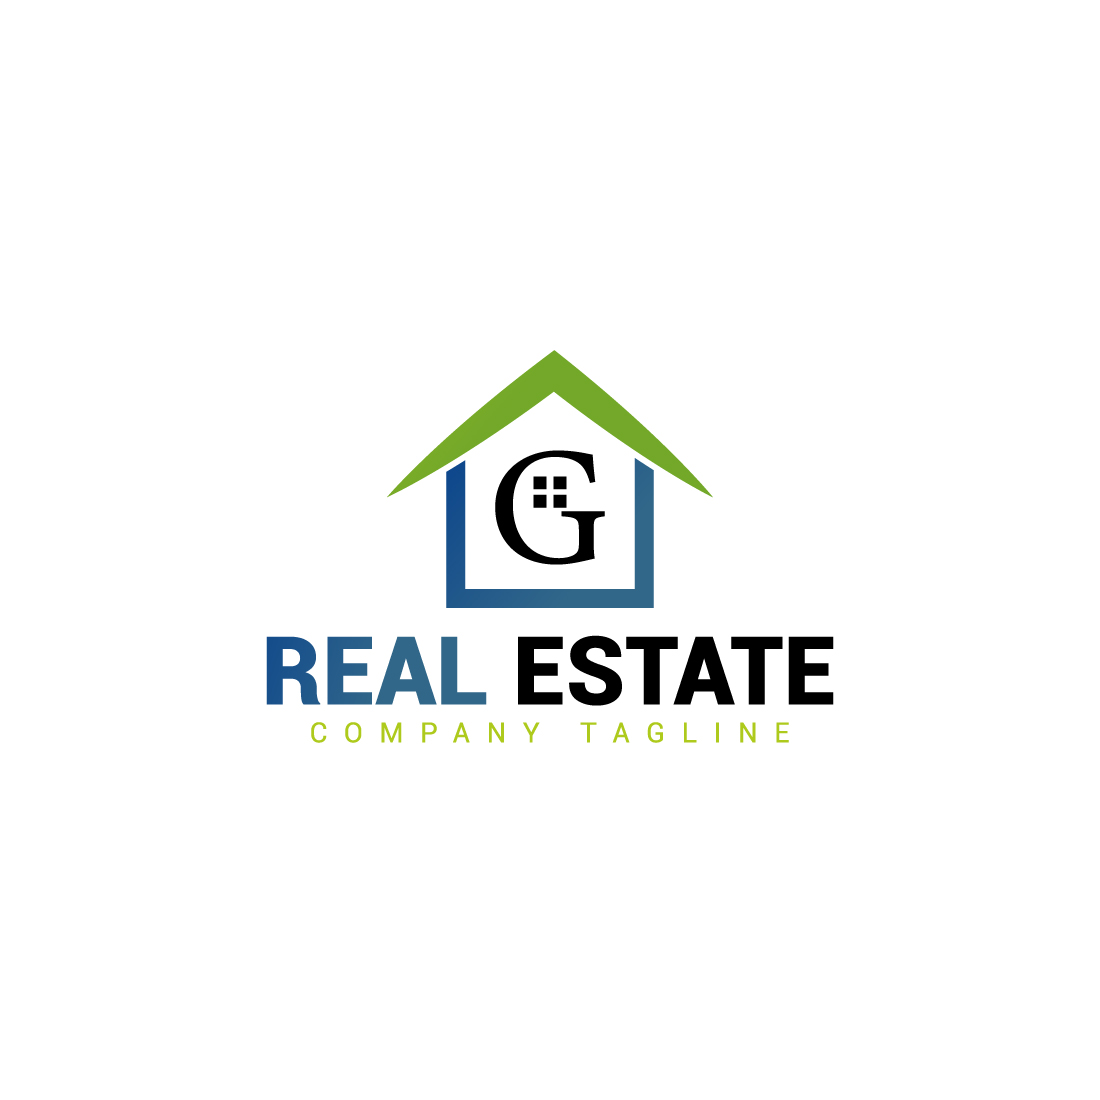 Real estate logo with green, dark blue color and G letter preview image.